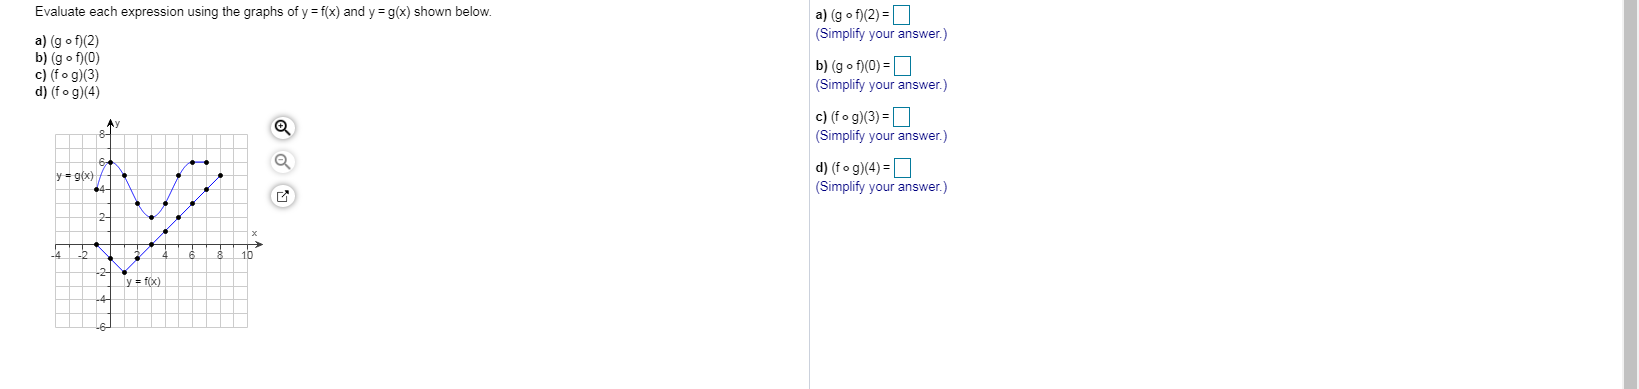 Evaluate each expression using the graphs of y = f(x) and y = g(x) shown below.
a) (g o f)(2) =D
(Simplify your answer.)
a) (g o f)(2)
b) (g o f)(0)
c) (fo g)(3)
d) (fo g)(4)
b) (g o f)(0) =O
(Simplify your answer.)
c) (fo g)(3) =D
(Simplify your answer.)
d) (f o g)(4) =O
(Simplify your answer.)
y- g(x)
16
y = f(x)
